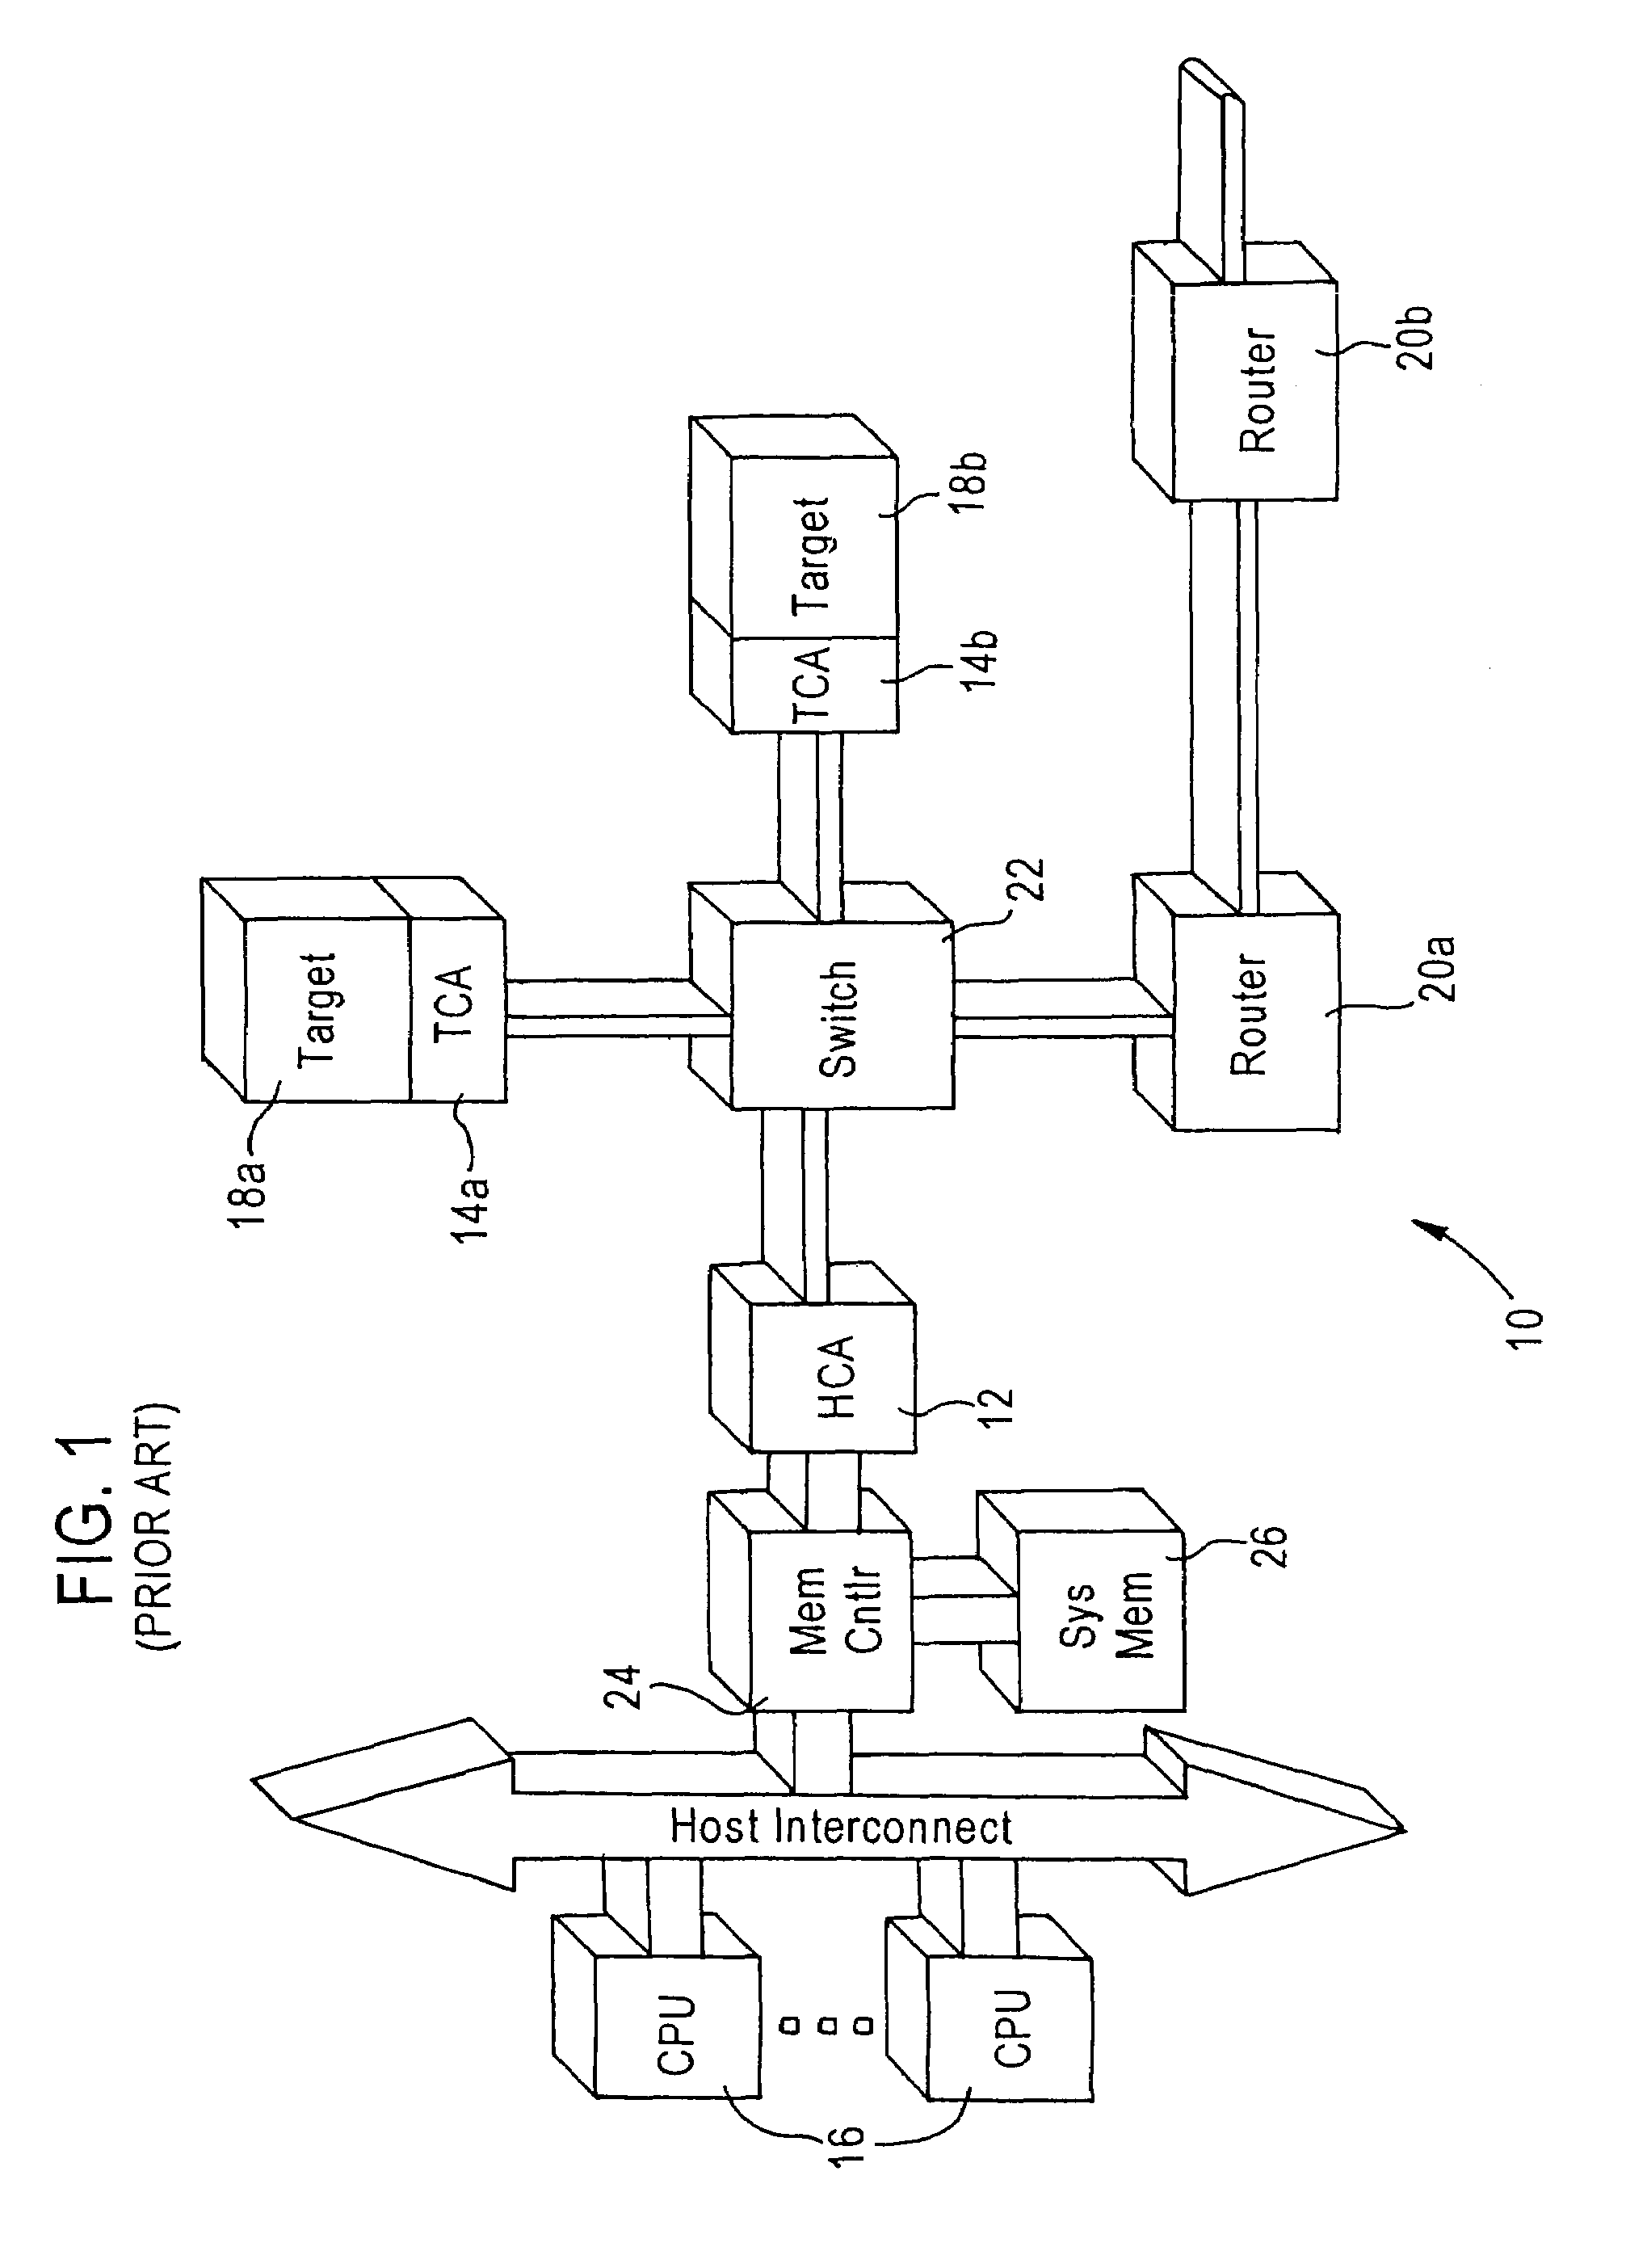 Arrangement for reducing application execution based on a determined lack of flow control credits for a network channel